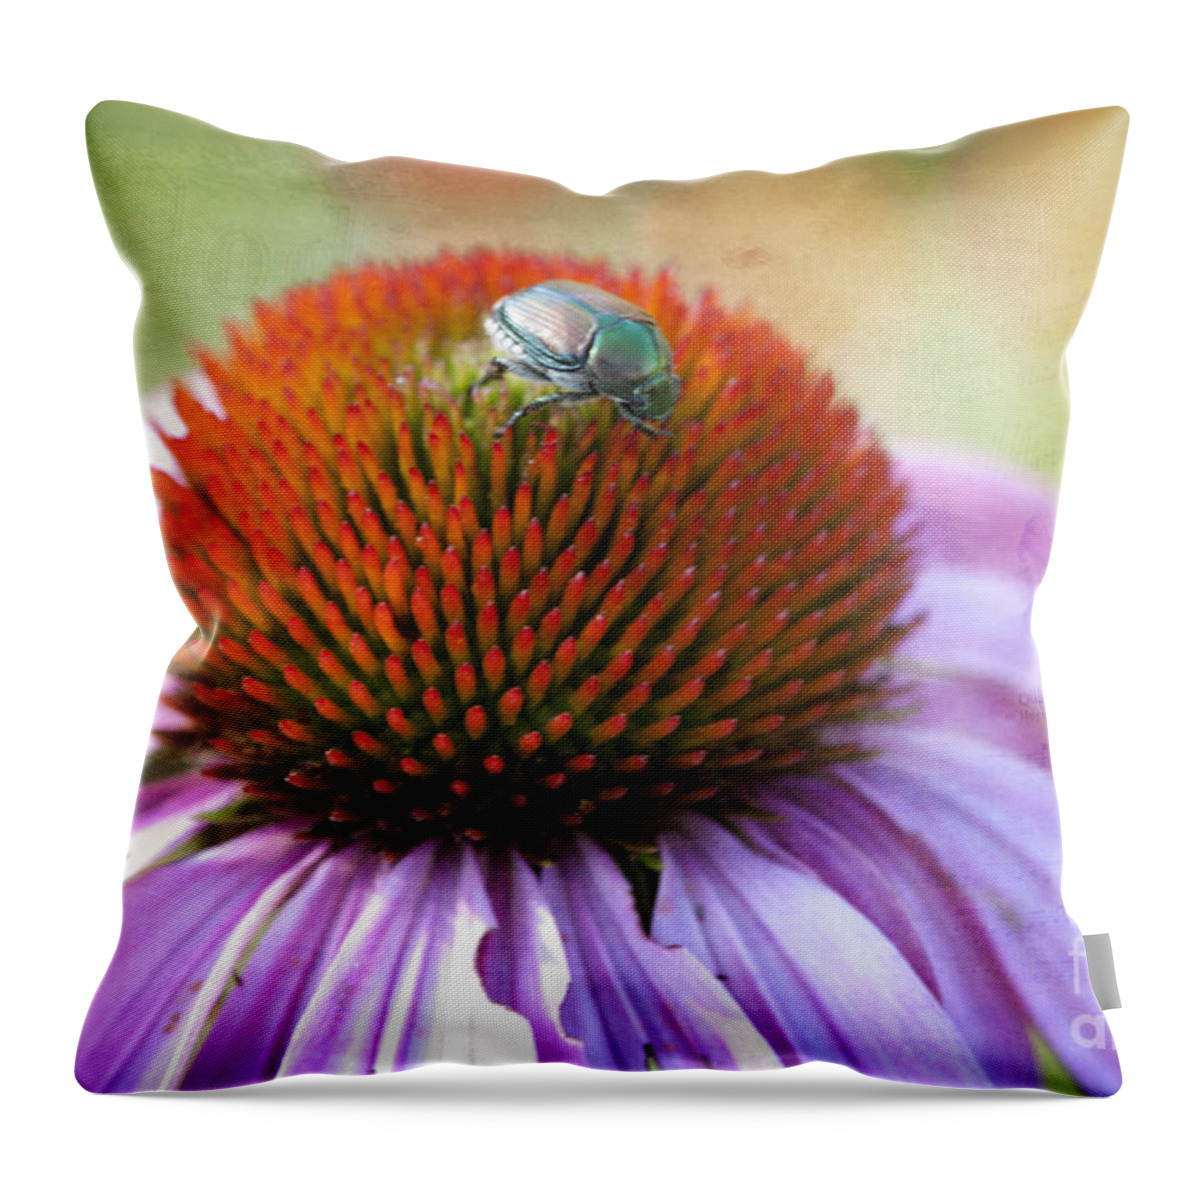 Beauty In Nature Throw Pillow featuring the photograph Beetle Bug by Juli Scalzi